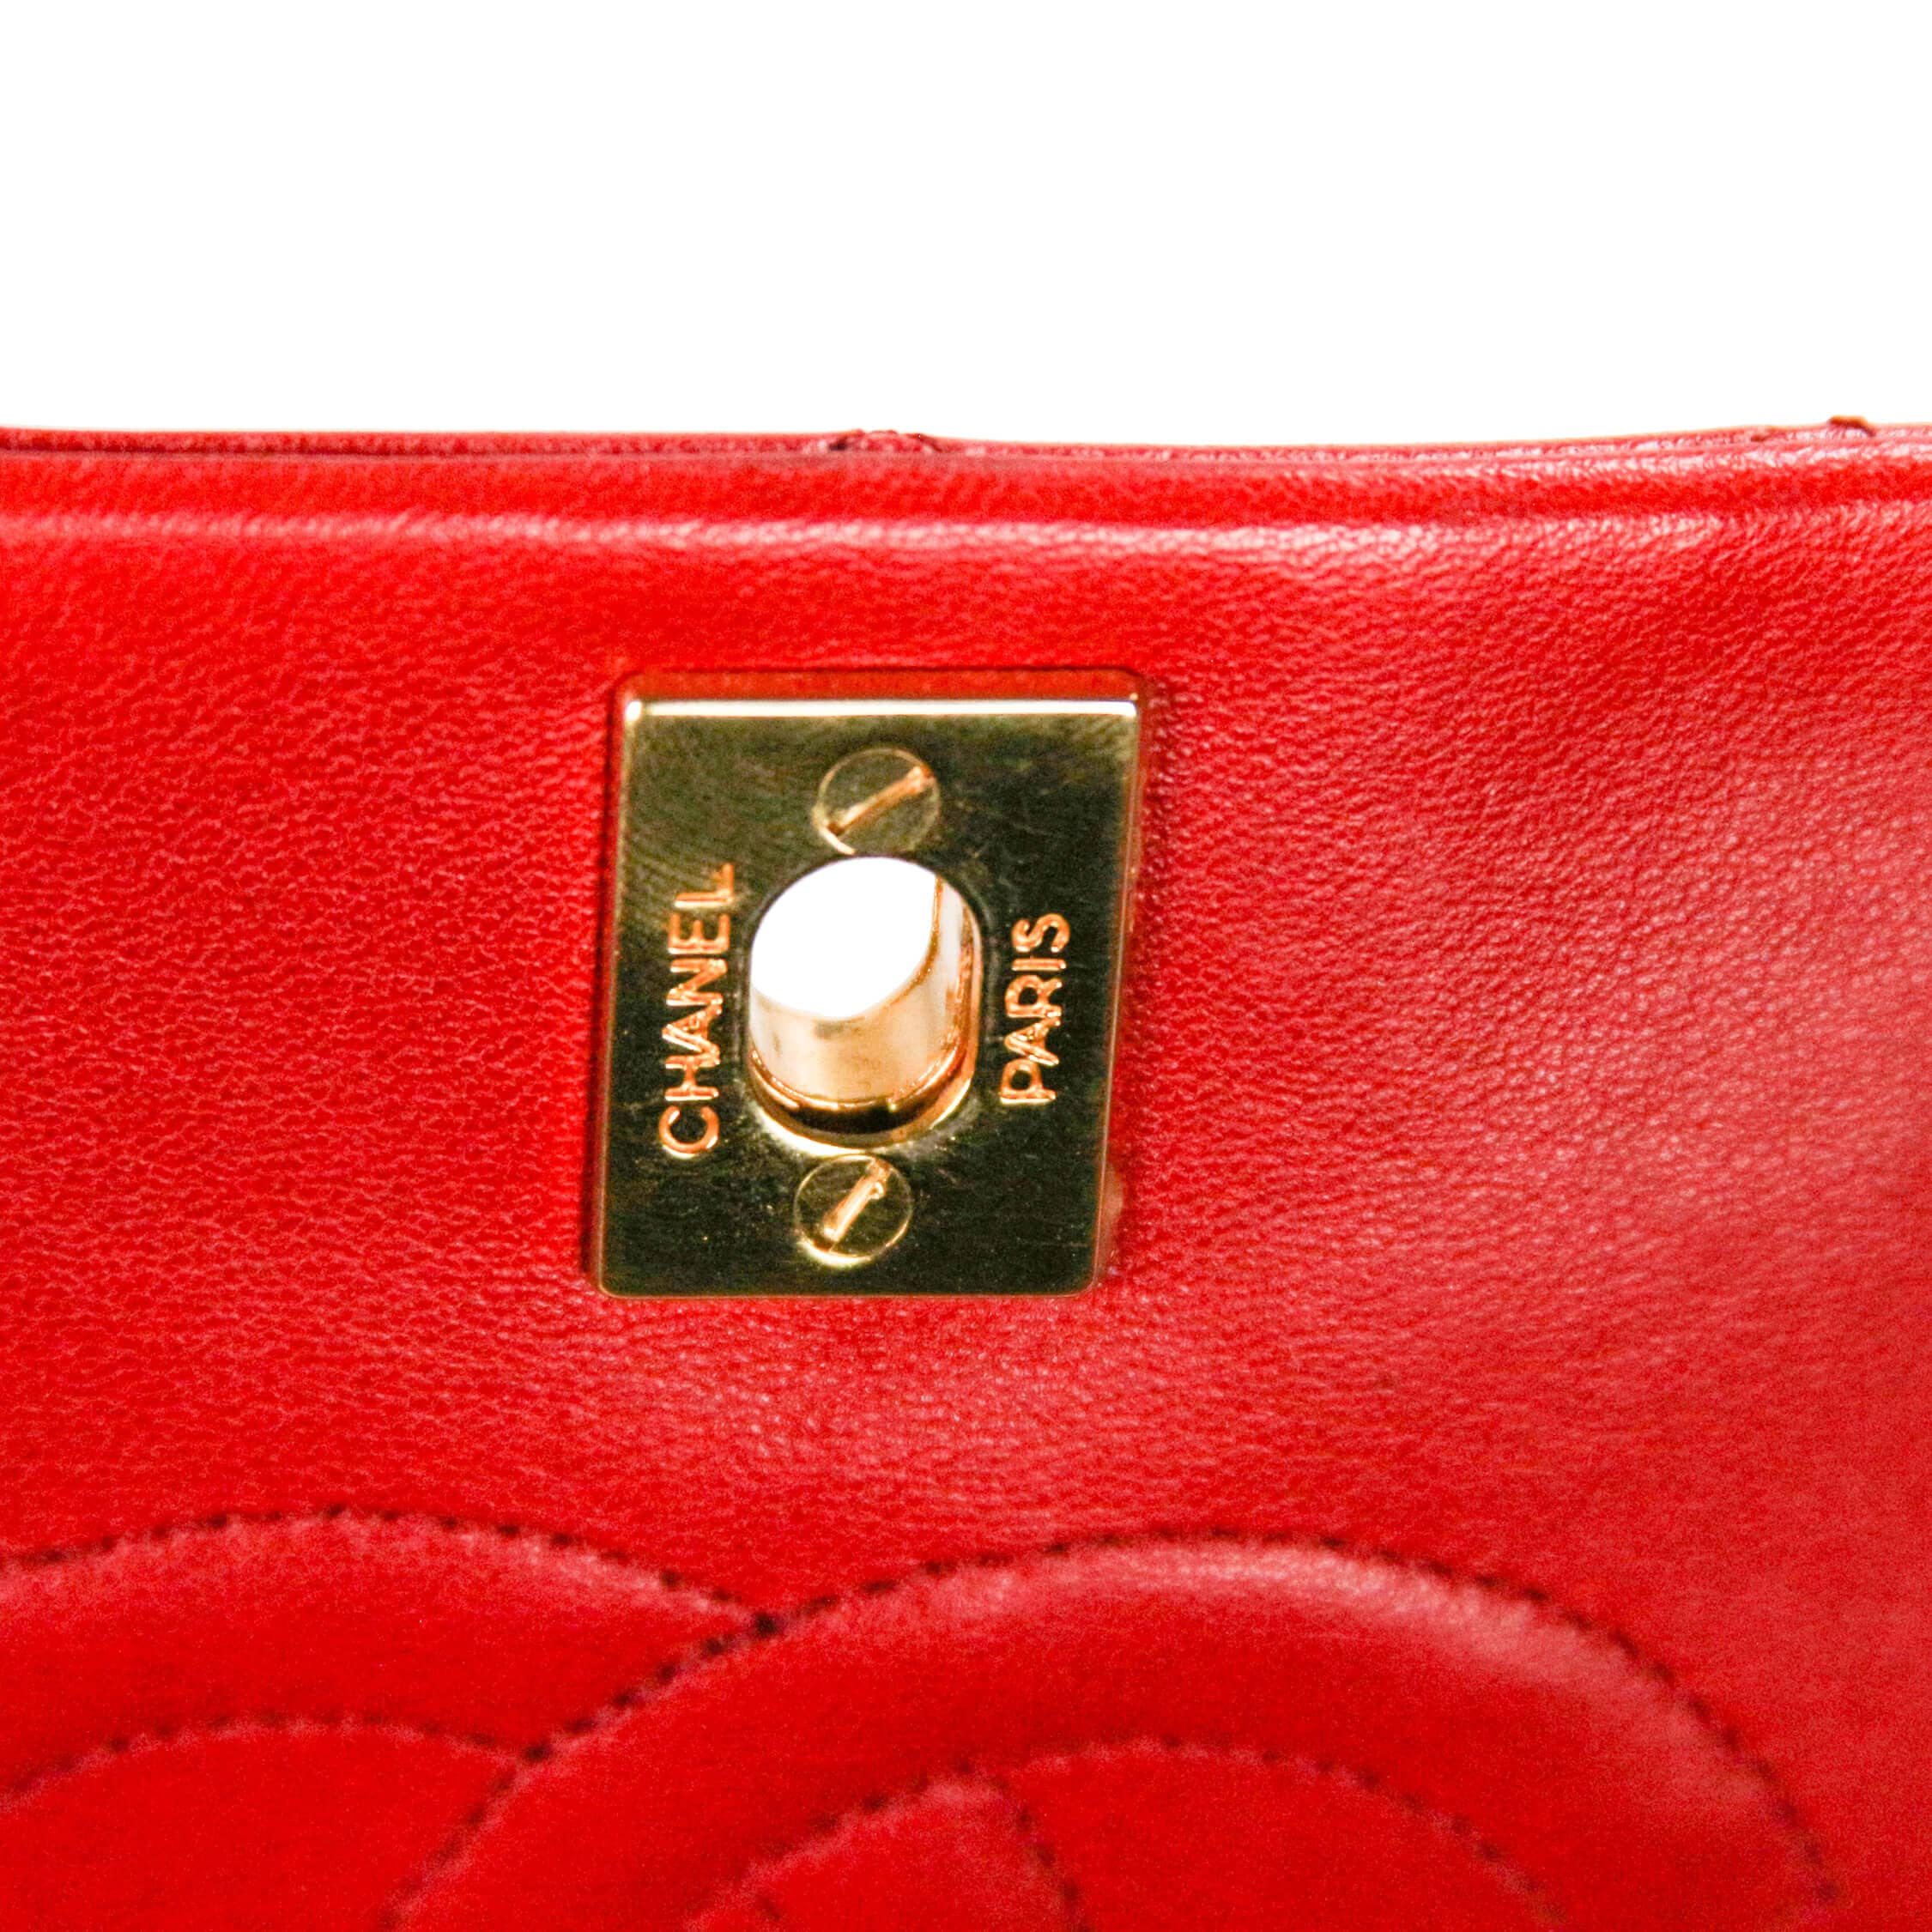 Chanel Full Flap Bag Small Red Lambskin Gold